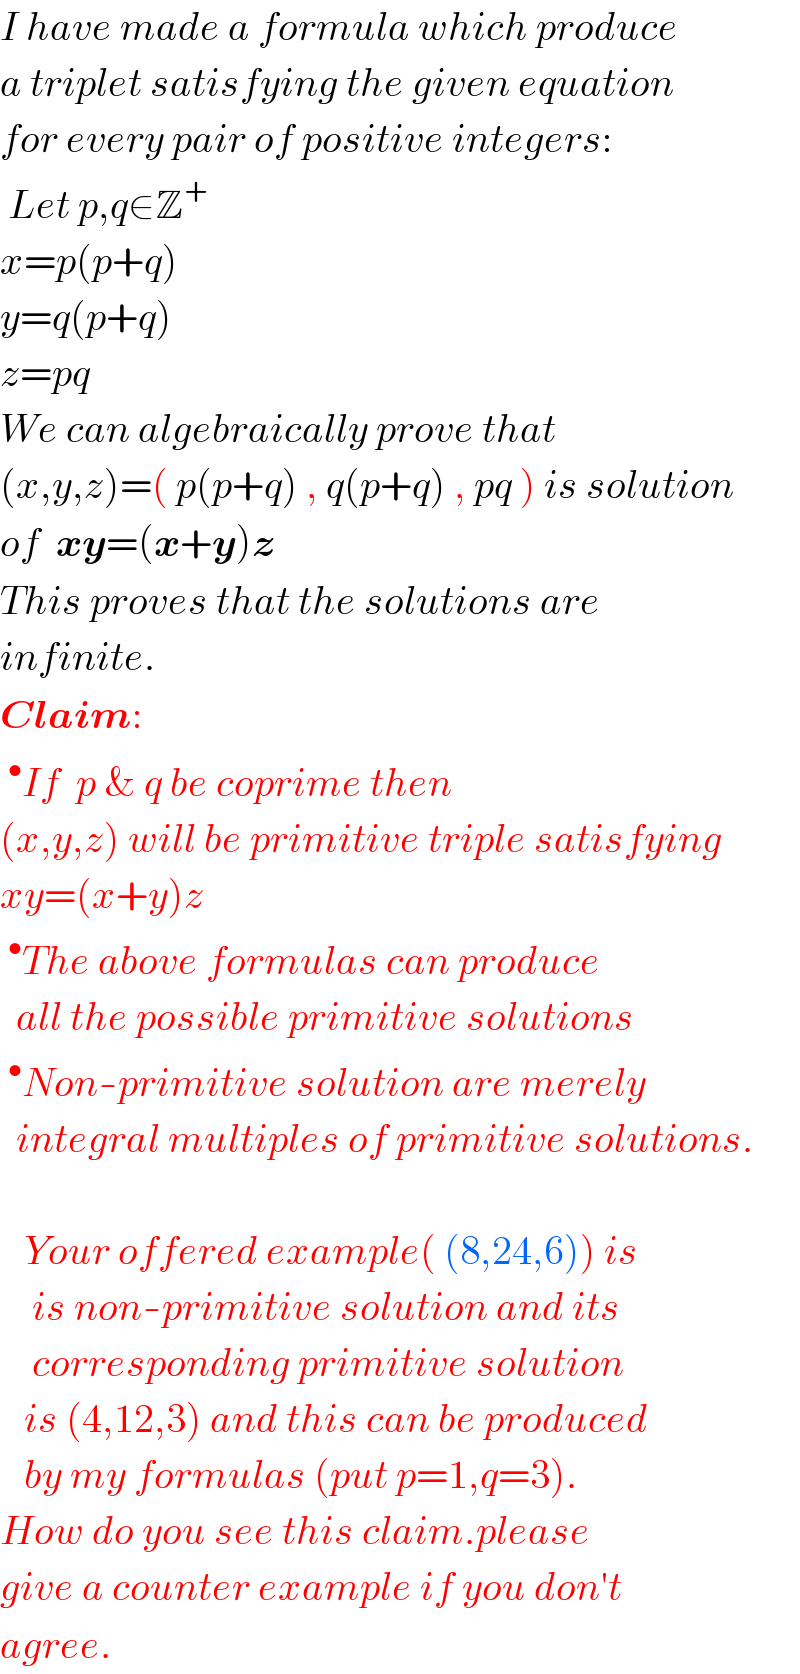 I have made a formula which produce  a triplet satisfying the given equation  for every pair of positive integers:   Let p,q∈Z^+   x=p(p+q)  y=q(p+q)  z=pq  We can algebraically prove that  (x,y,z)=( p(p+q) , q(p+q) , pq ) is solution  of  xy=(x+y)z  This proves that the solutions are  infinite.  Claim:  ^• If  p & q be coprime then  (x,y,z) will be primitive triple satisfying  xy=(x+y)z  ^• The above formulas can produce    all the possible primitive solutions  ^• Non-primitive solution are merely    integral multiples of primitive solutions.       Your offered example( (8,24,6)) is      is non-primitive solution and its      corresponding primitive solution     is (4,12,3) and this can be produced     by my formulas (put p=1,q=3).  How do you see this claim.please  give a counter example if you don′t  agree.  